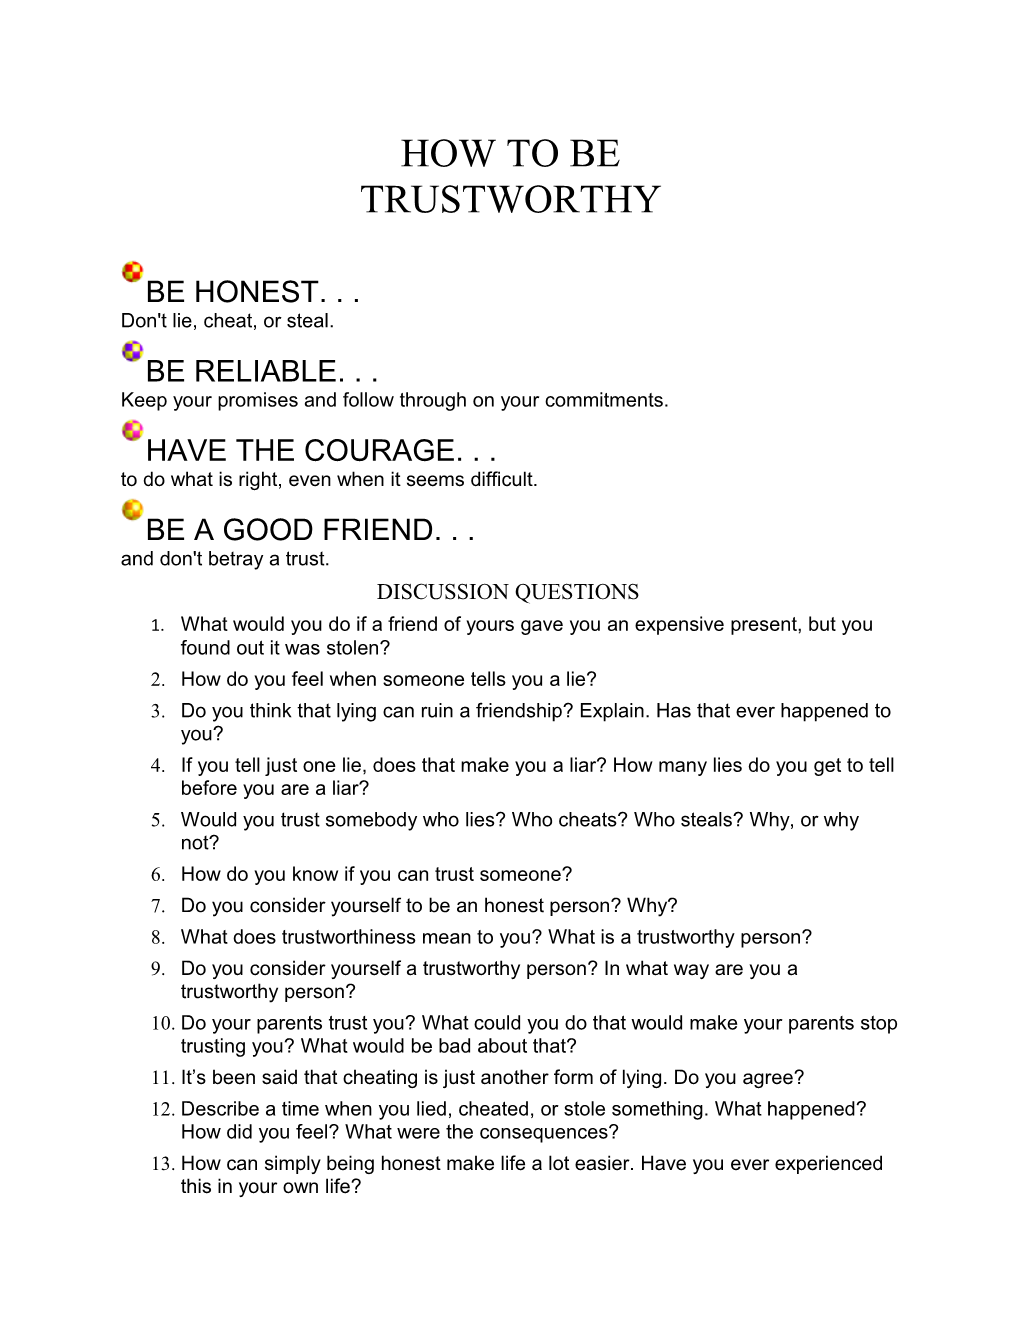 How to Be Trustworthy